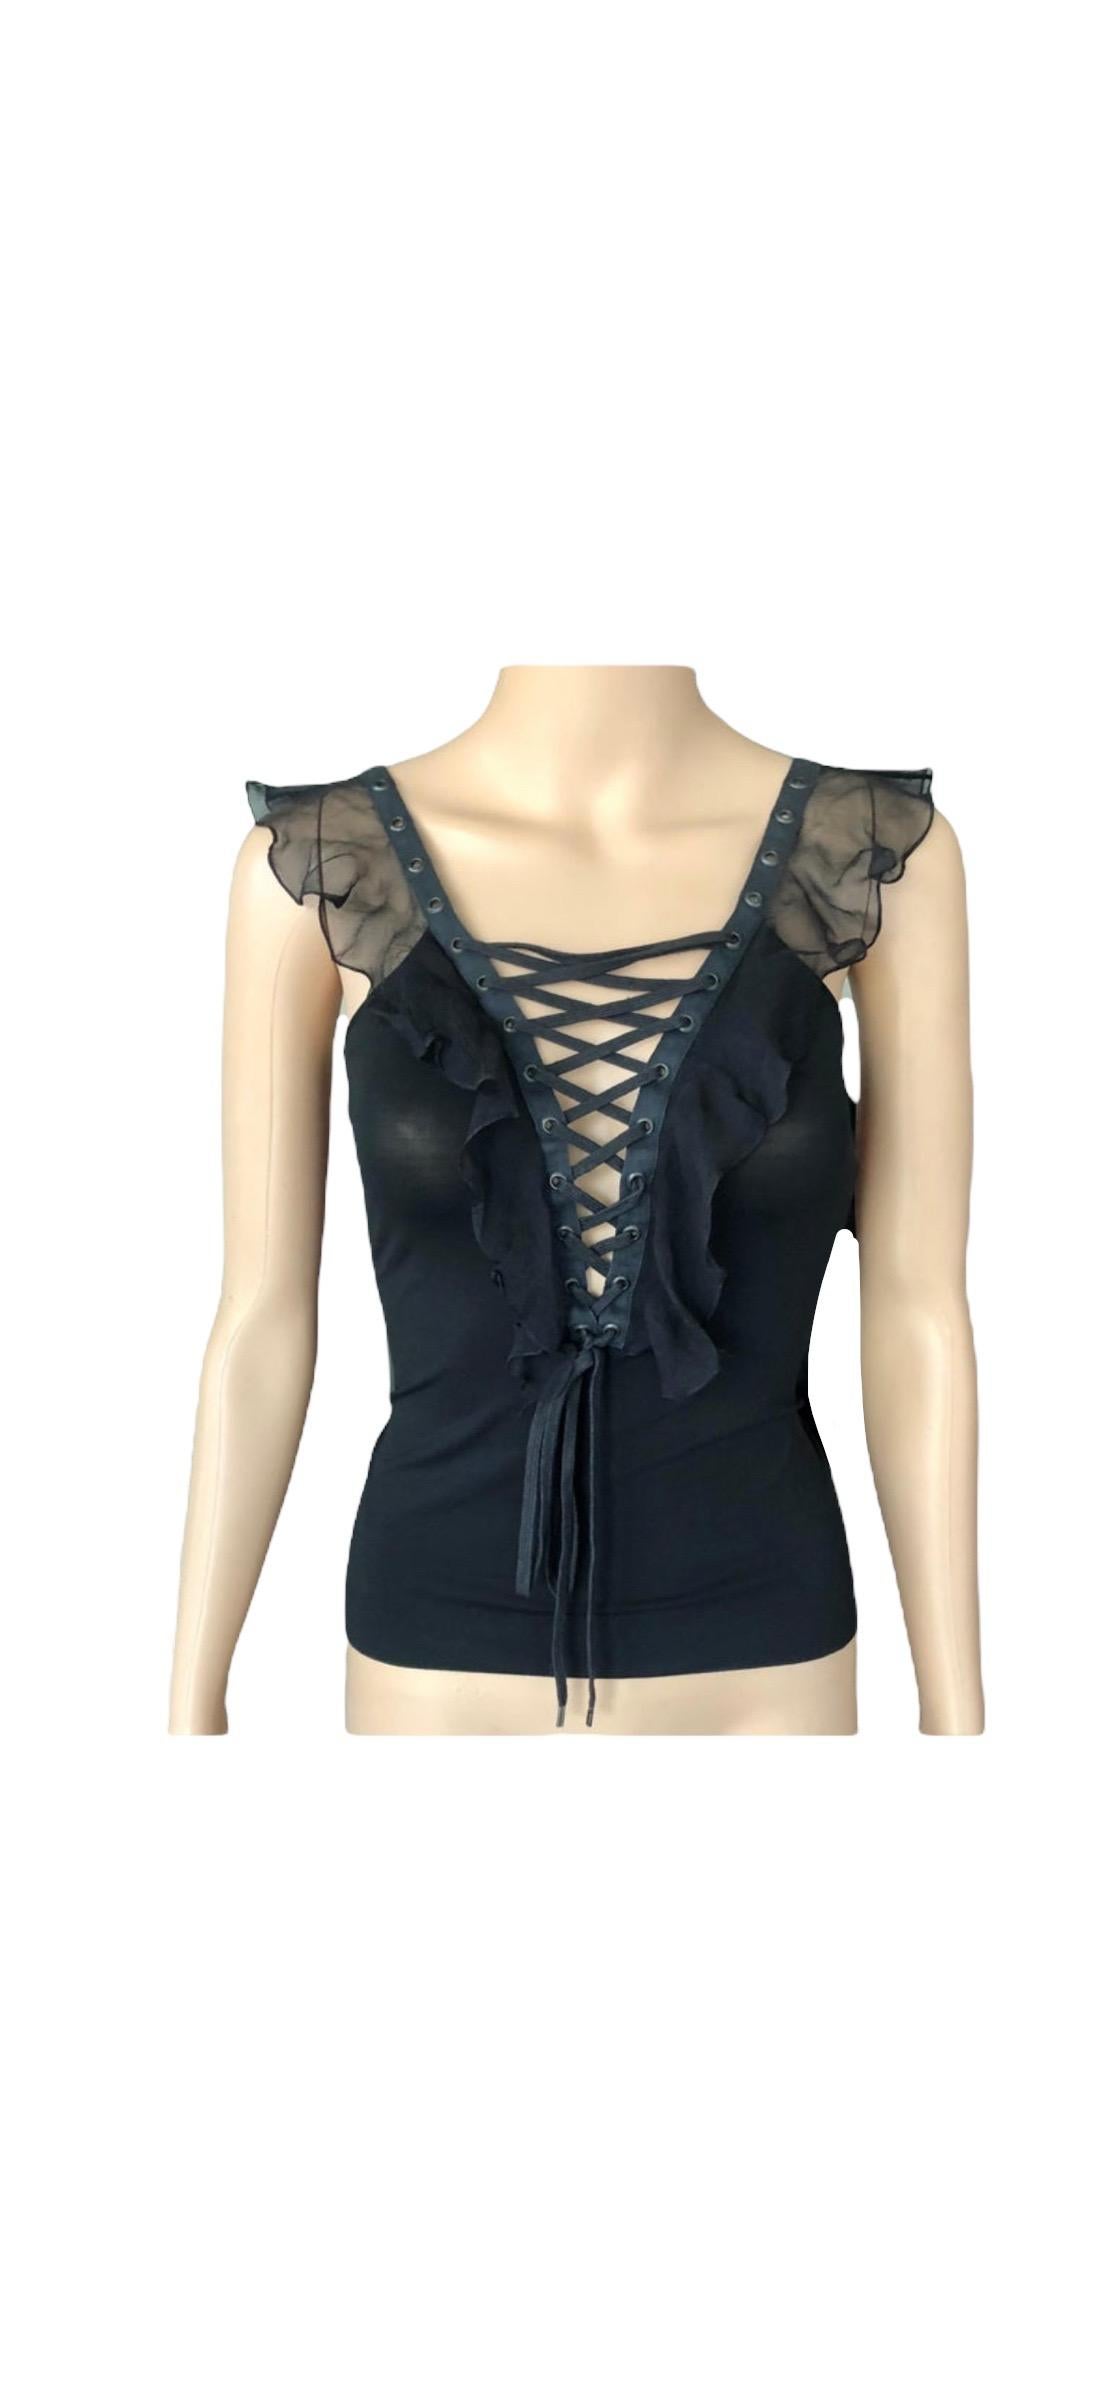 Christian Dior By John Galliano S/S 2003 Plunging Lace Up Tie Up Black Top For Sale 3